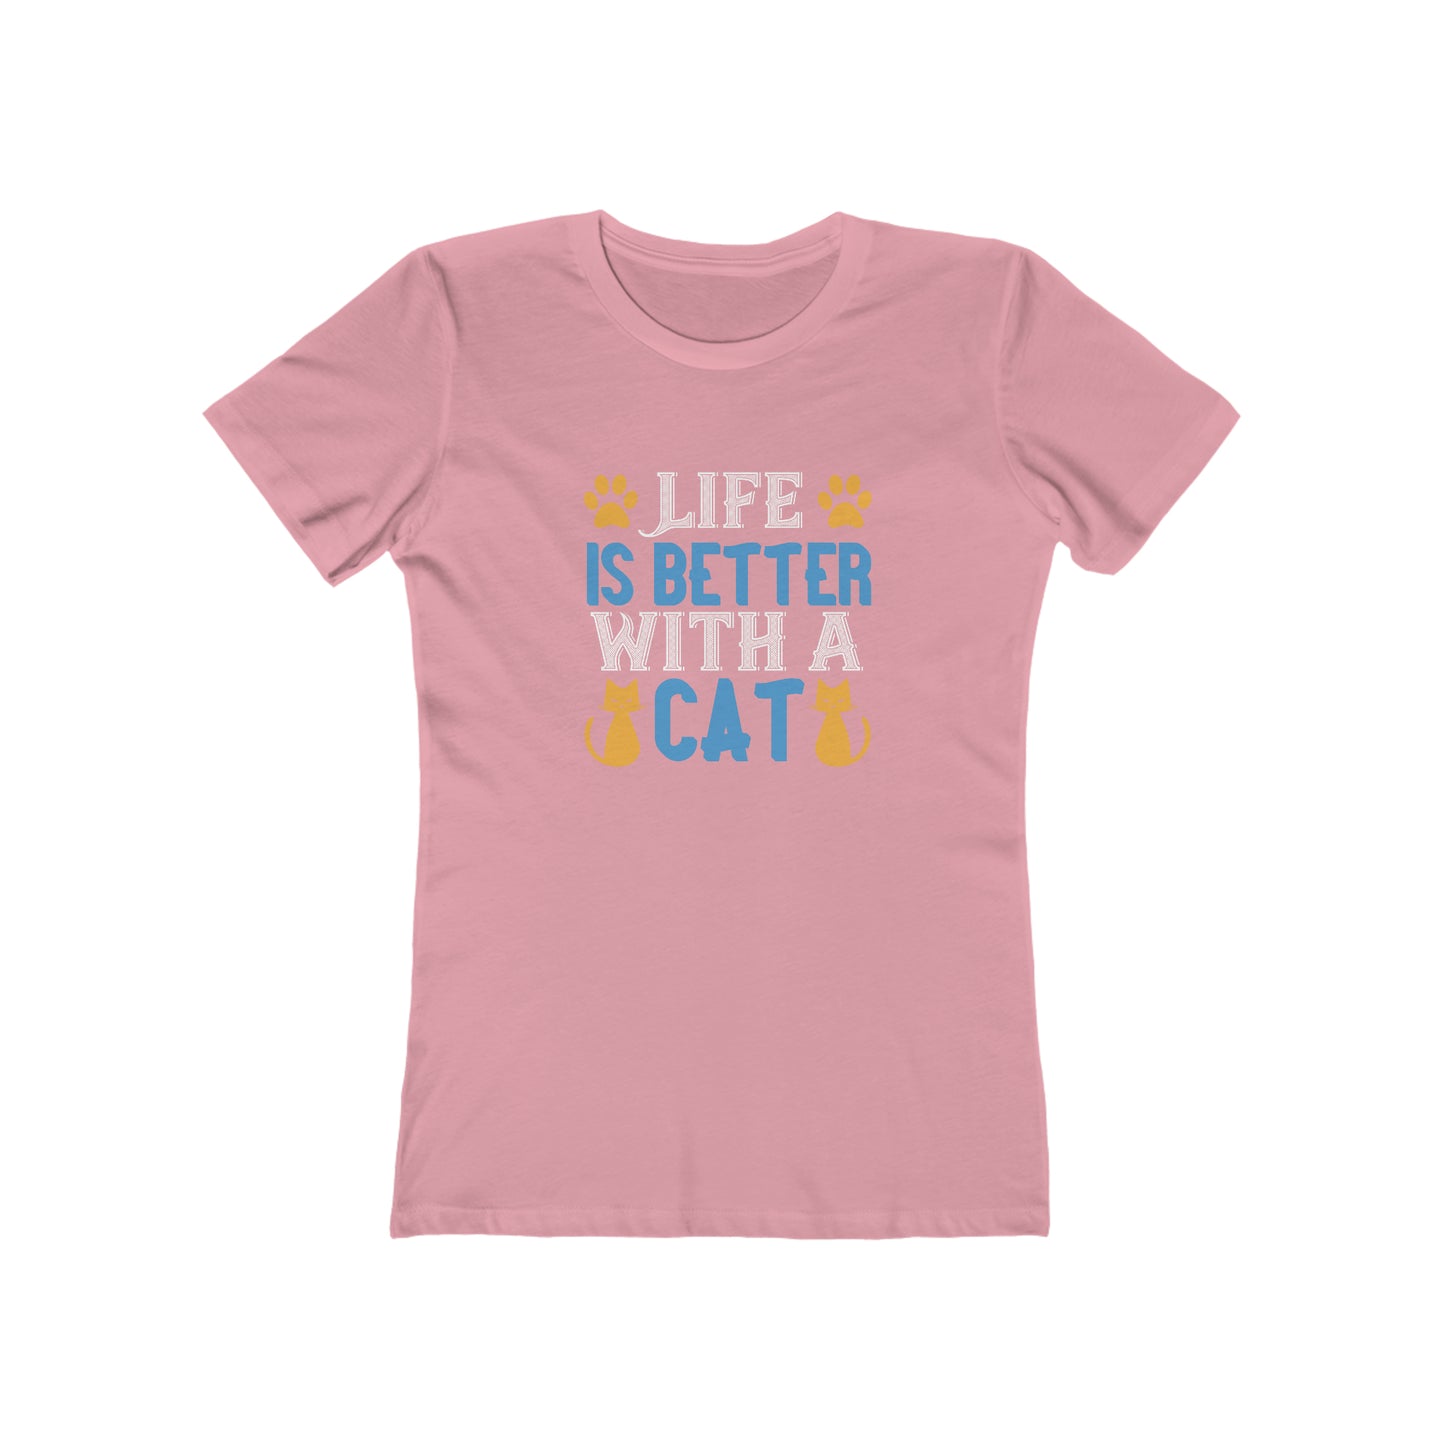 Life Is Better With Cat - Women's T-shirt